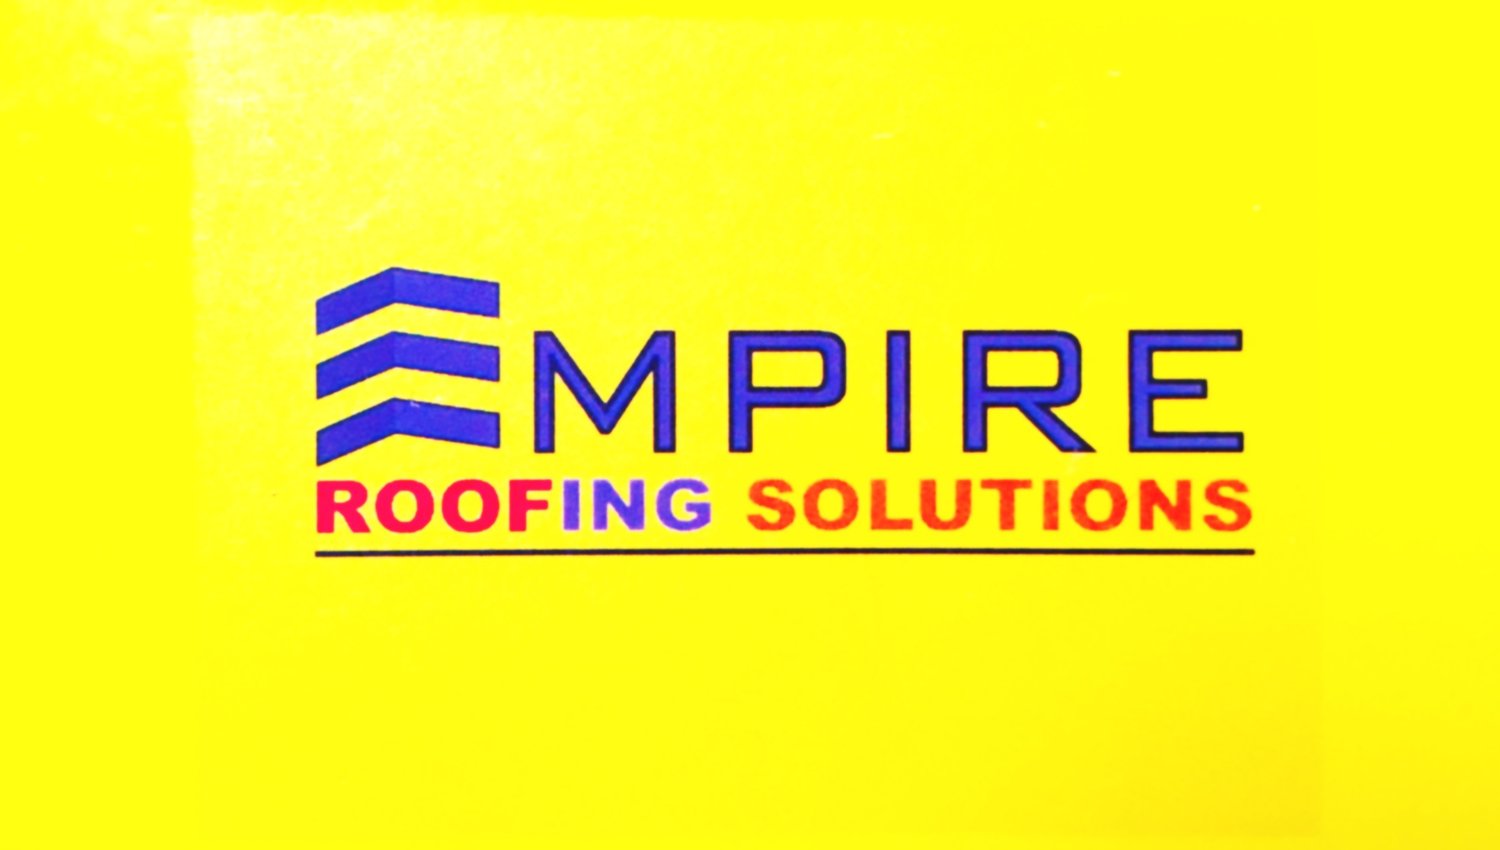 EMPIRE ROOFING SOLUTIONS